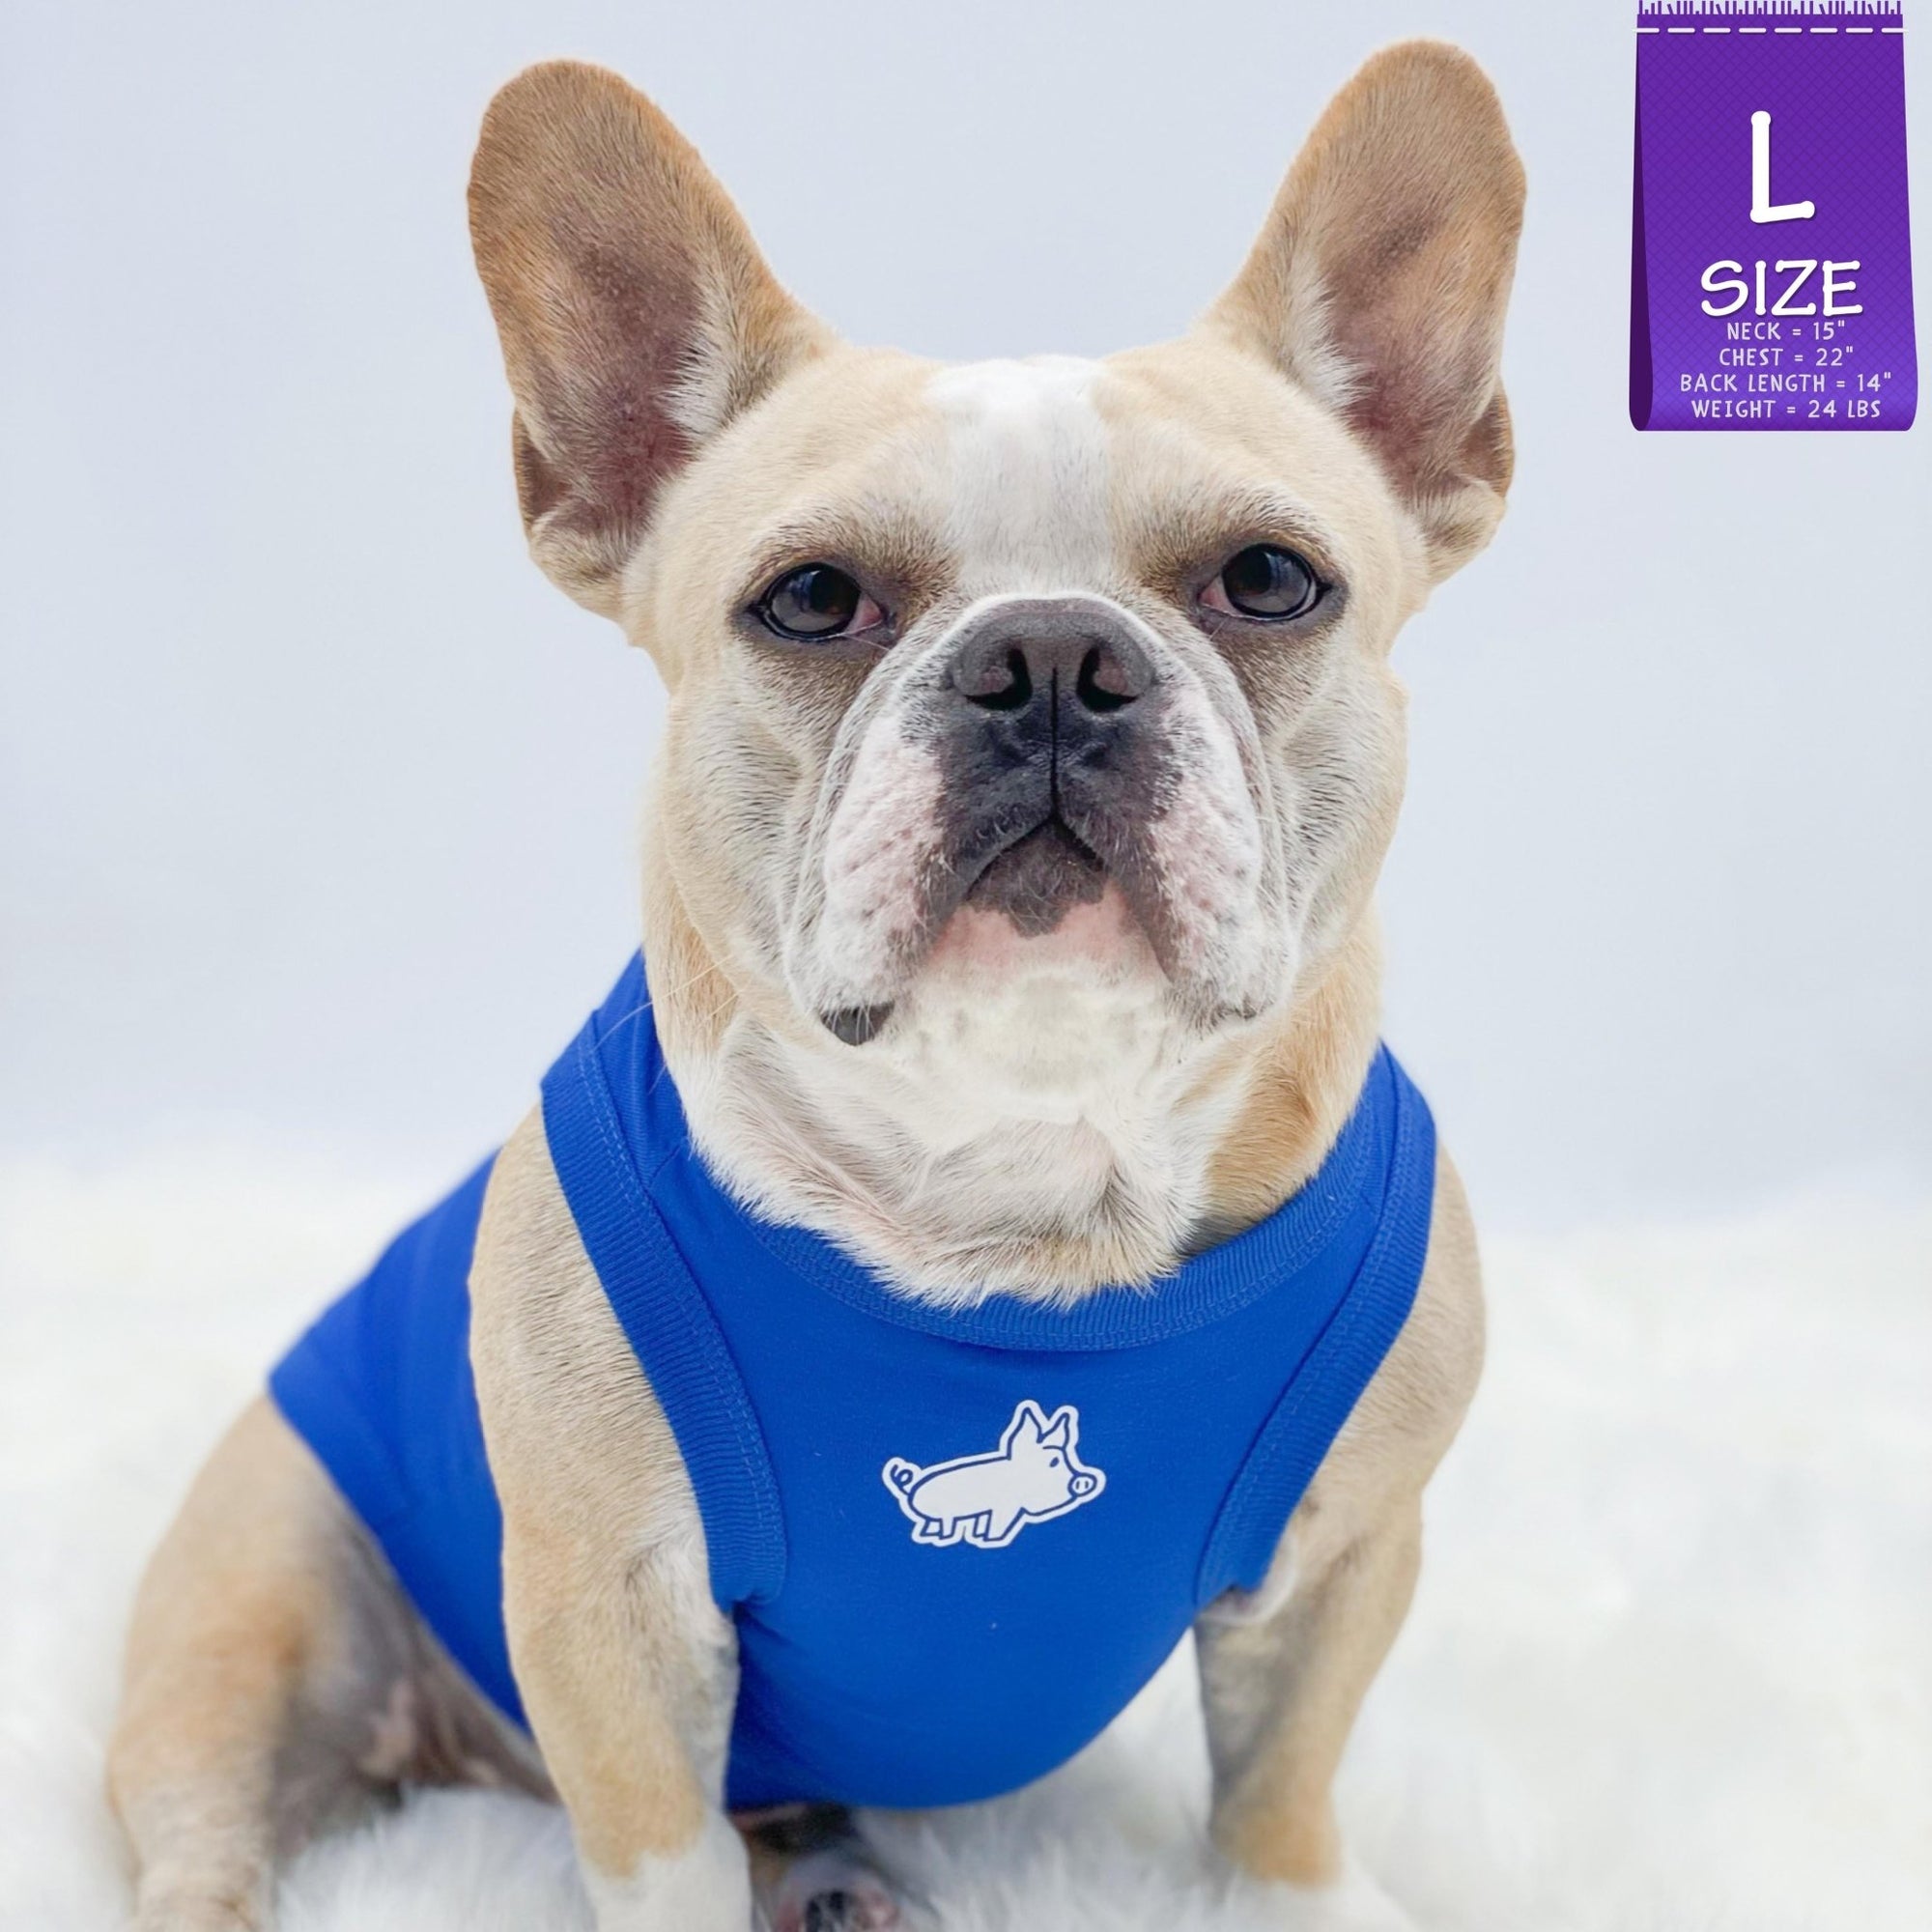 Dog T-Shirt - Frenchie Bulldog wearing &quot;Farm Life&quot; blue dog t-shirt - pig emoji on chest in white - against a solid white background - Wag Trendz